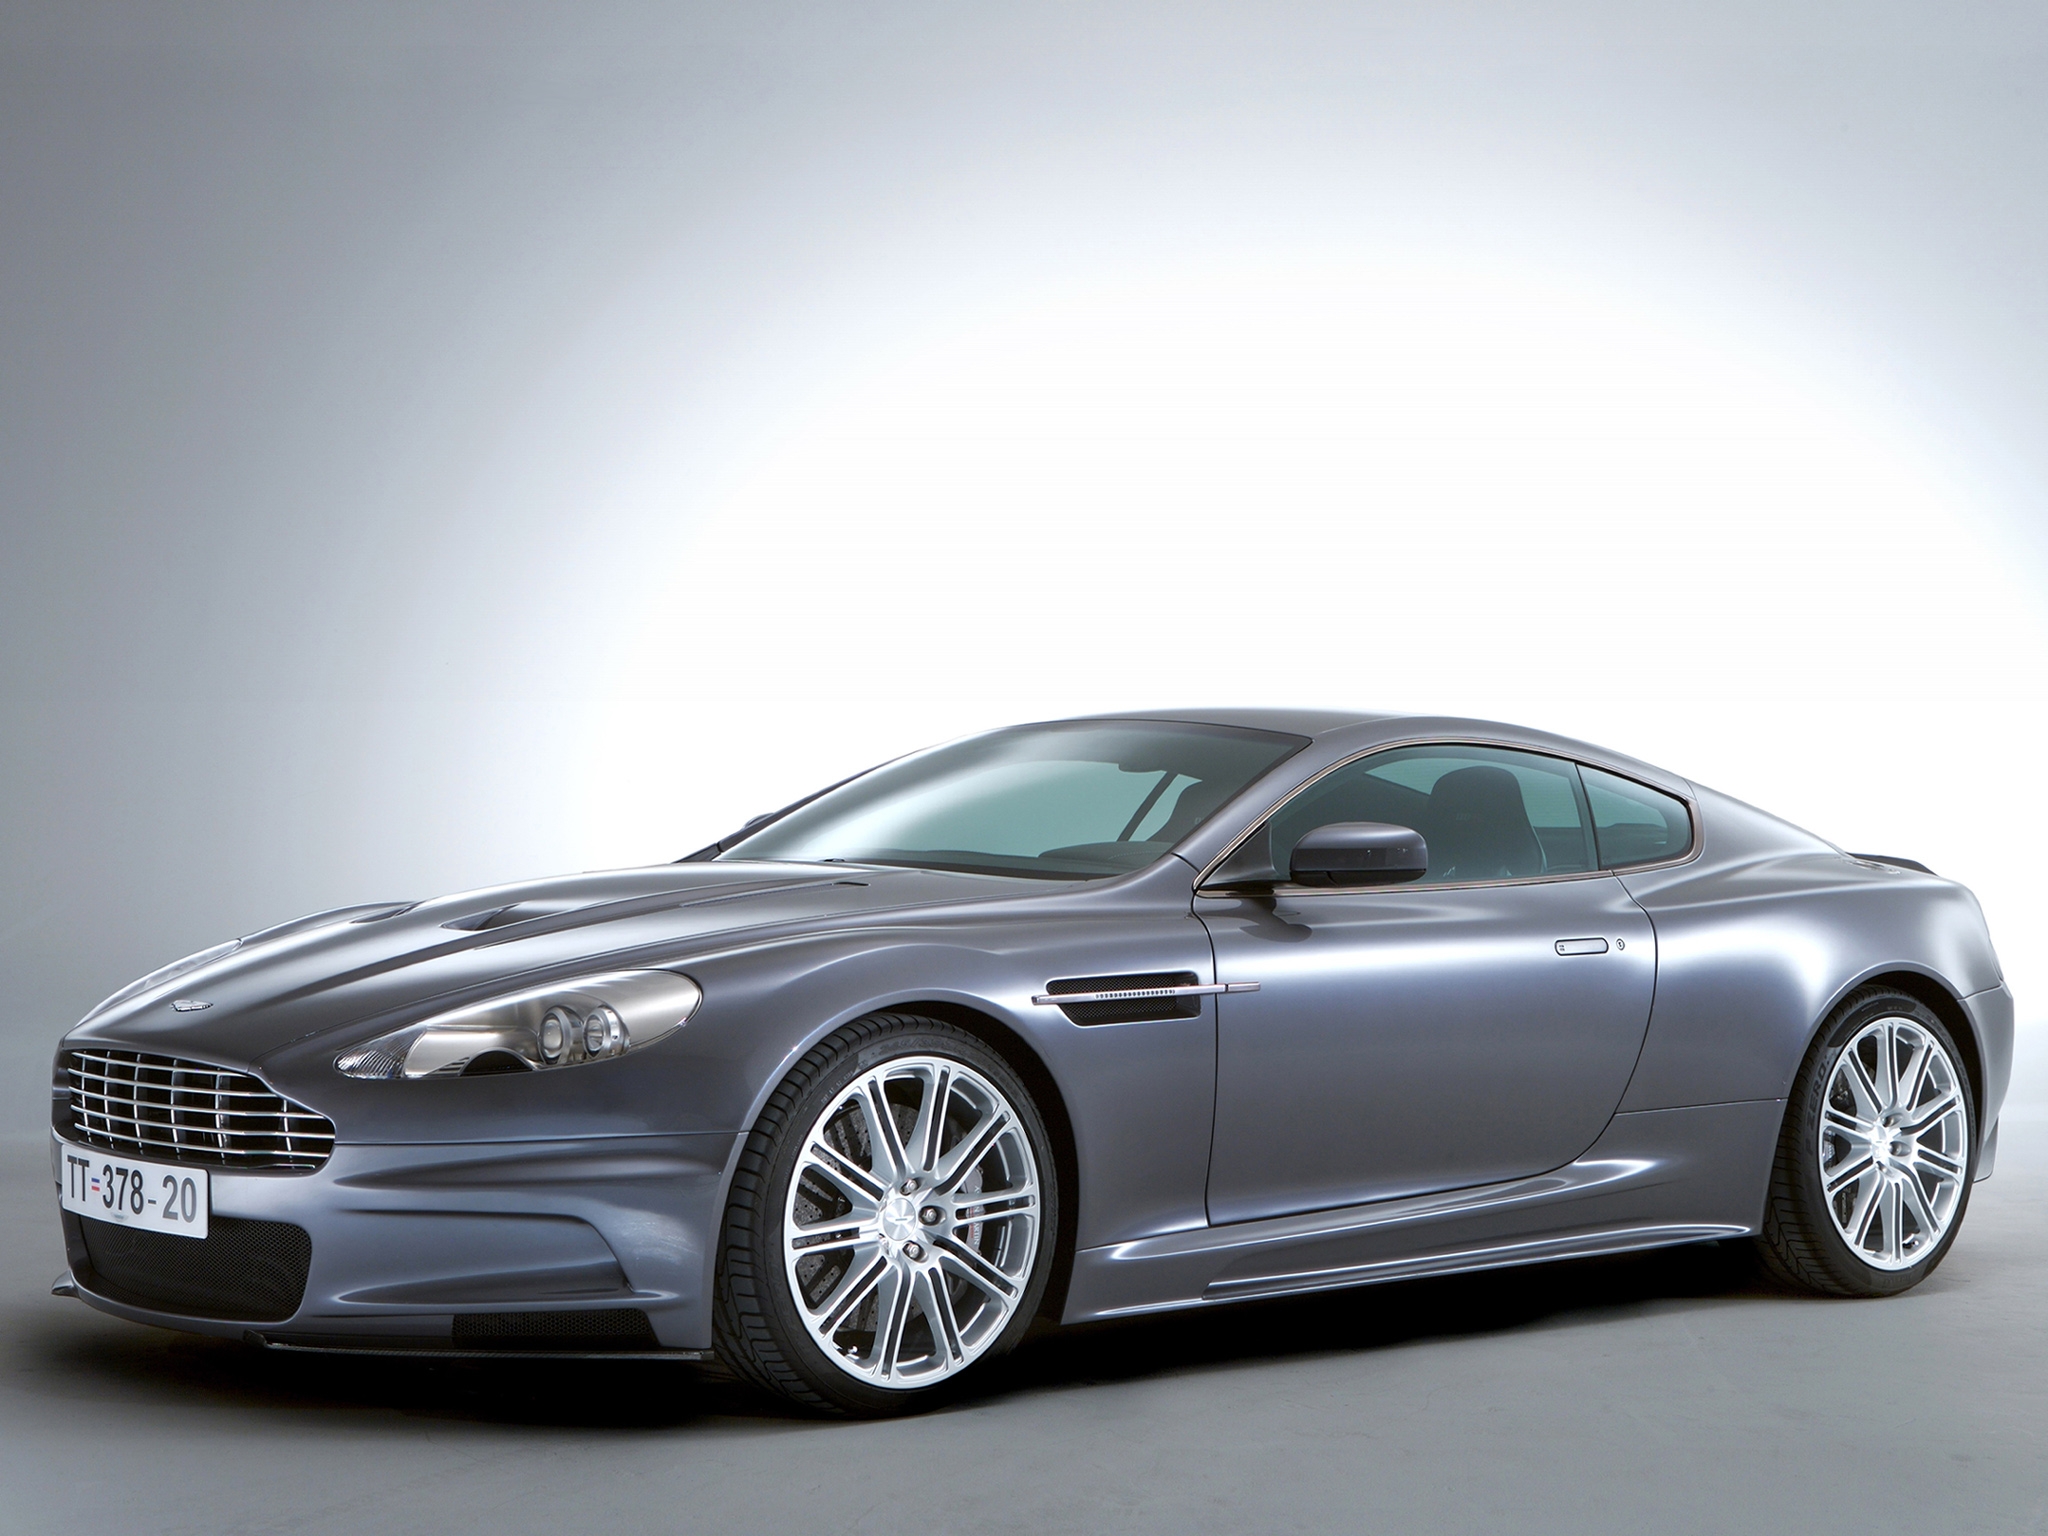 cars, auto, aston martin, grey, side view, dbs, 2006 phone background